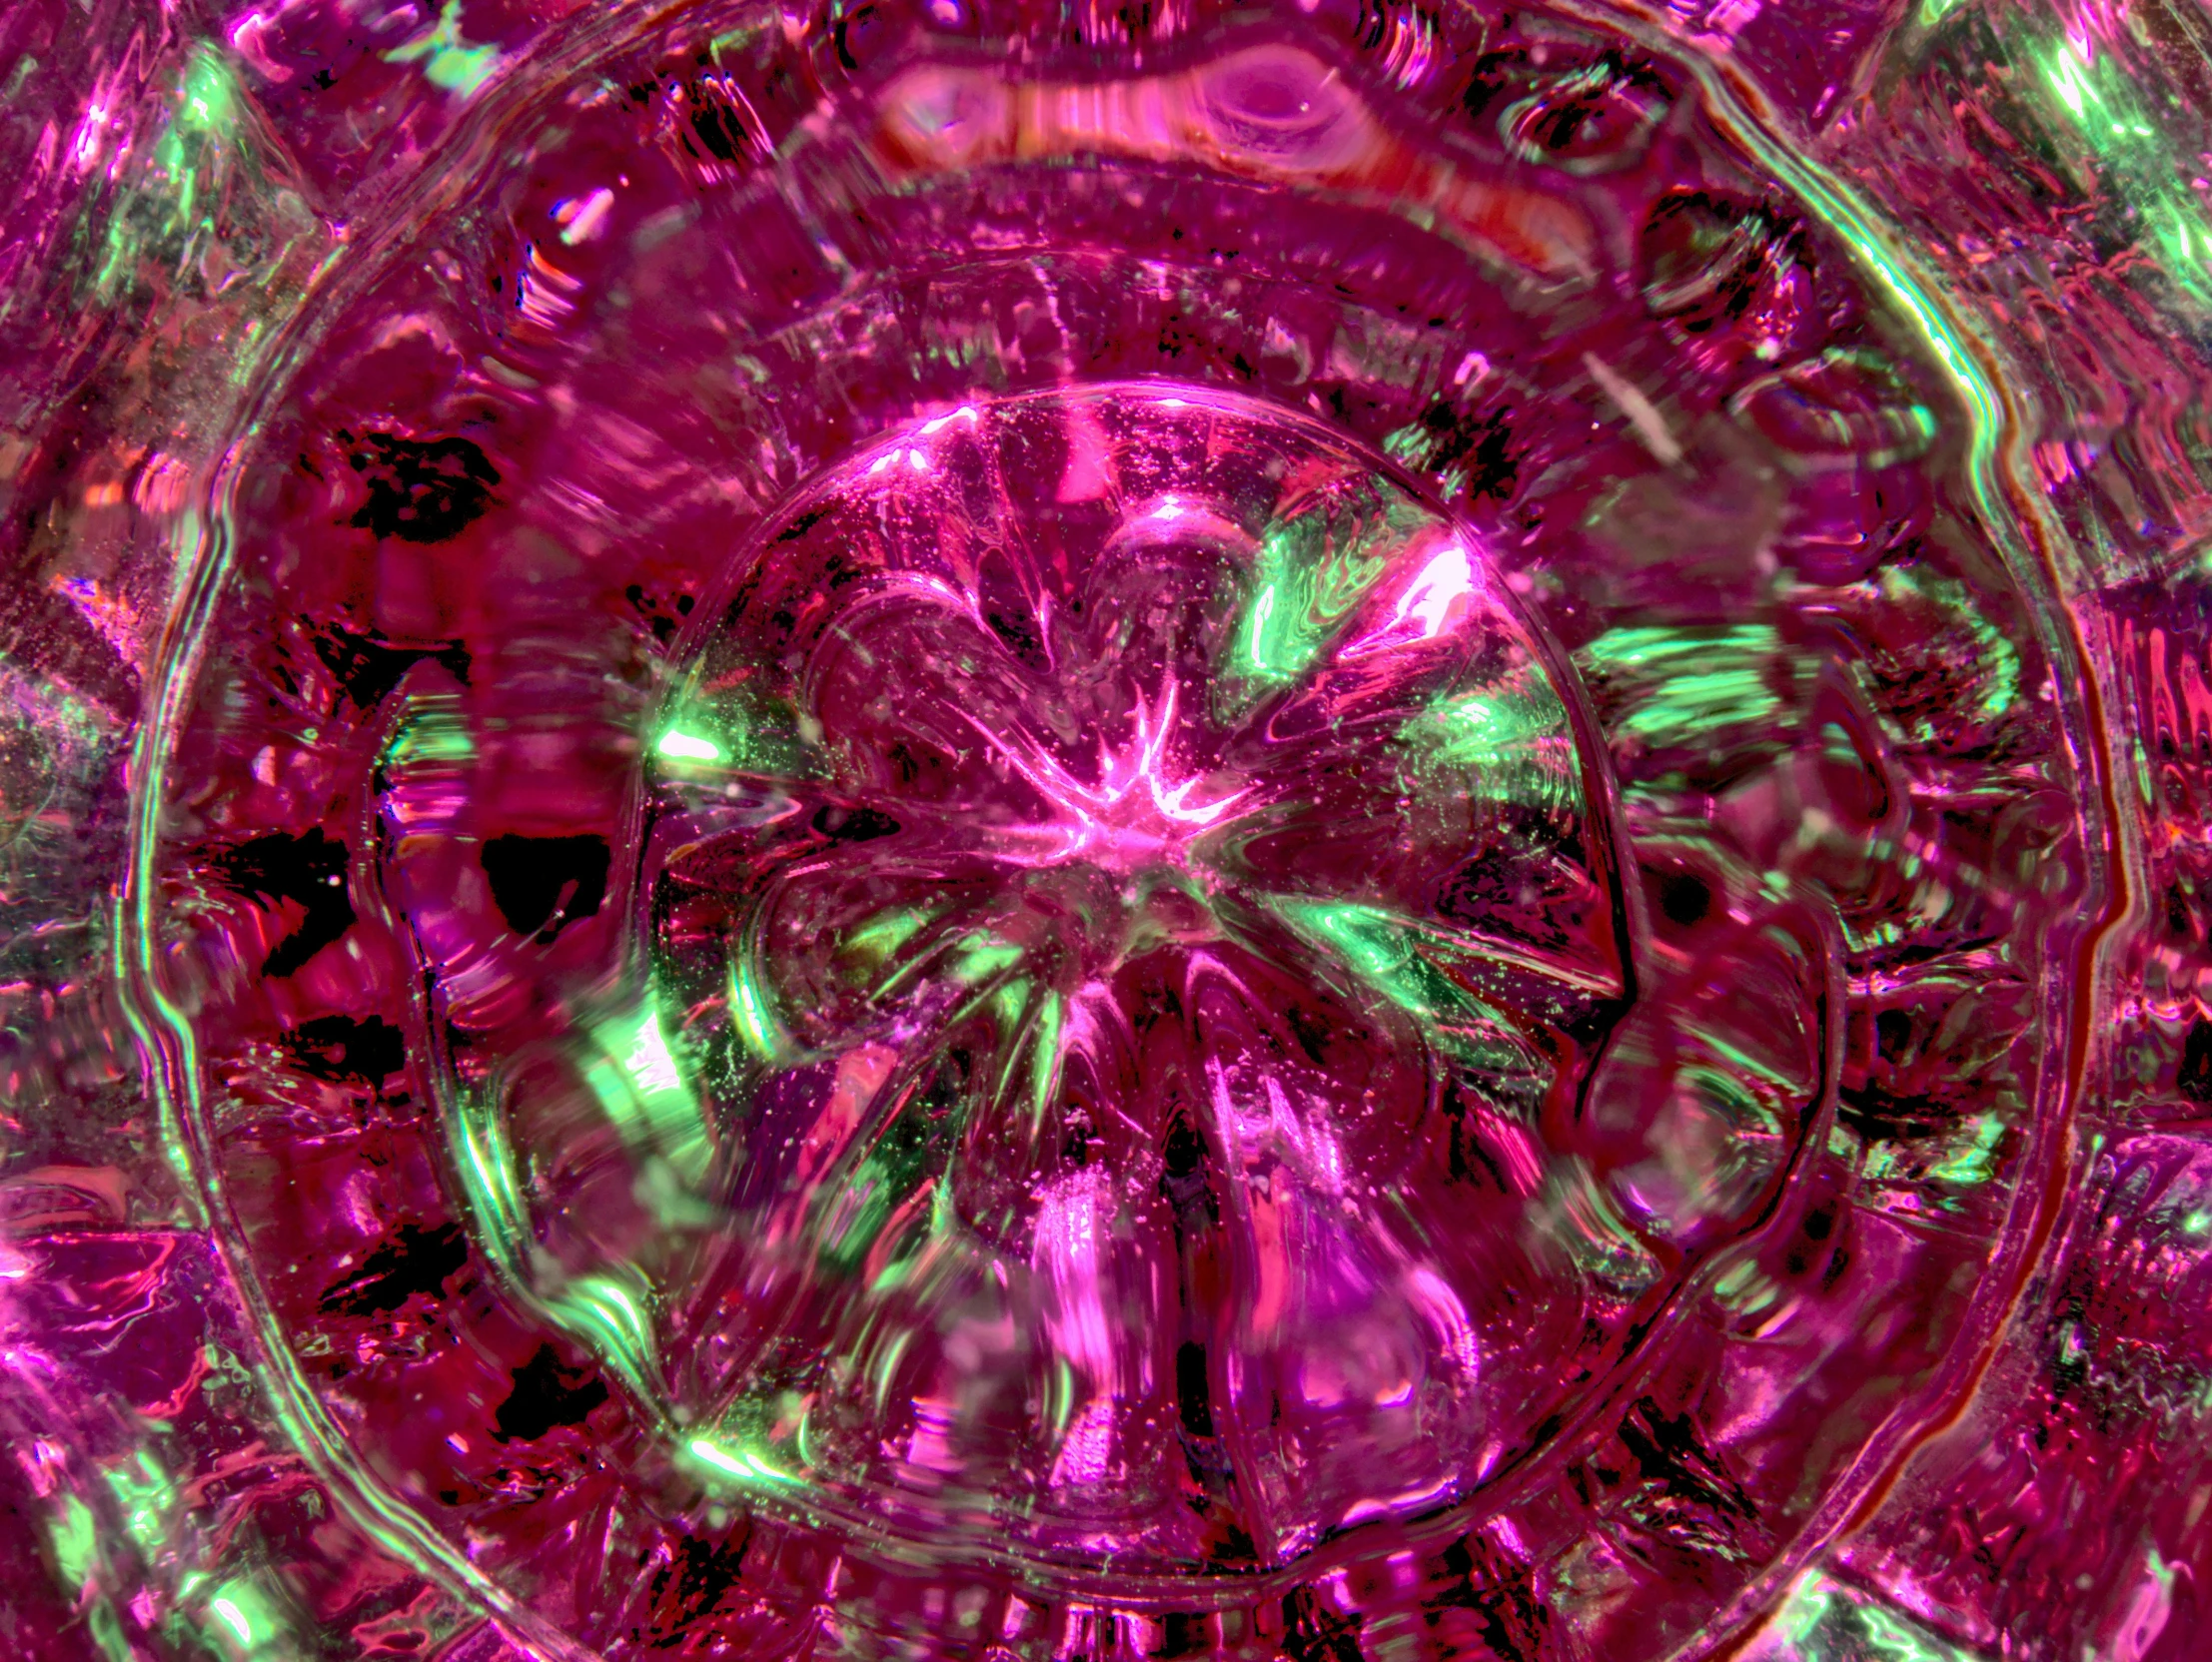 an image of some glass in a bowl